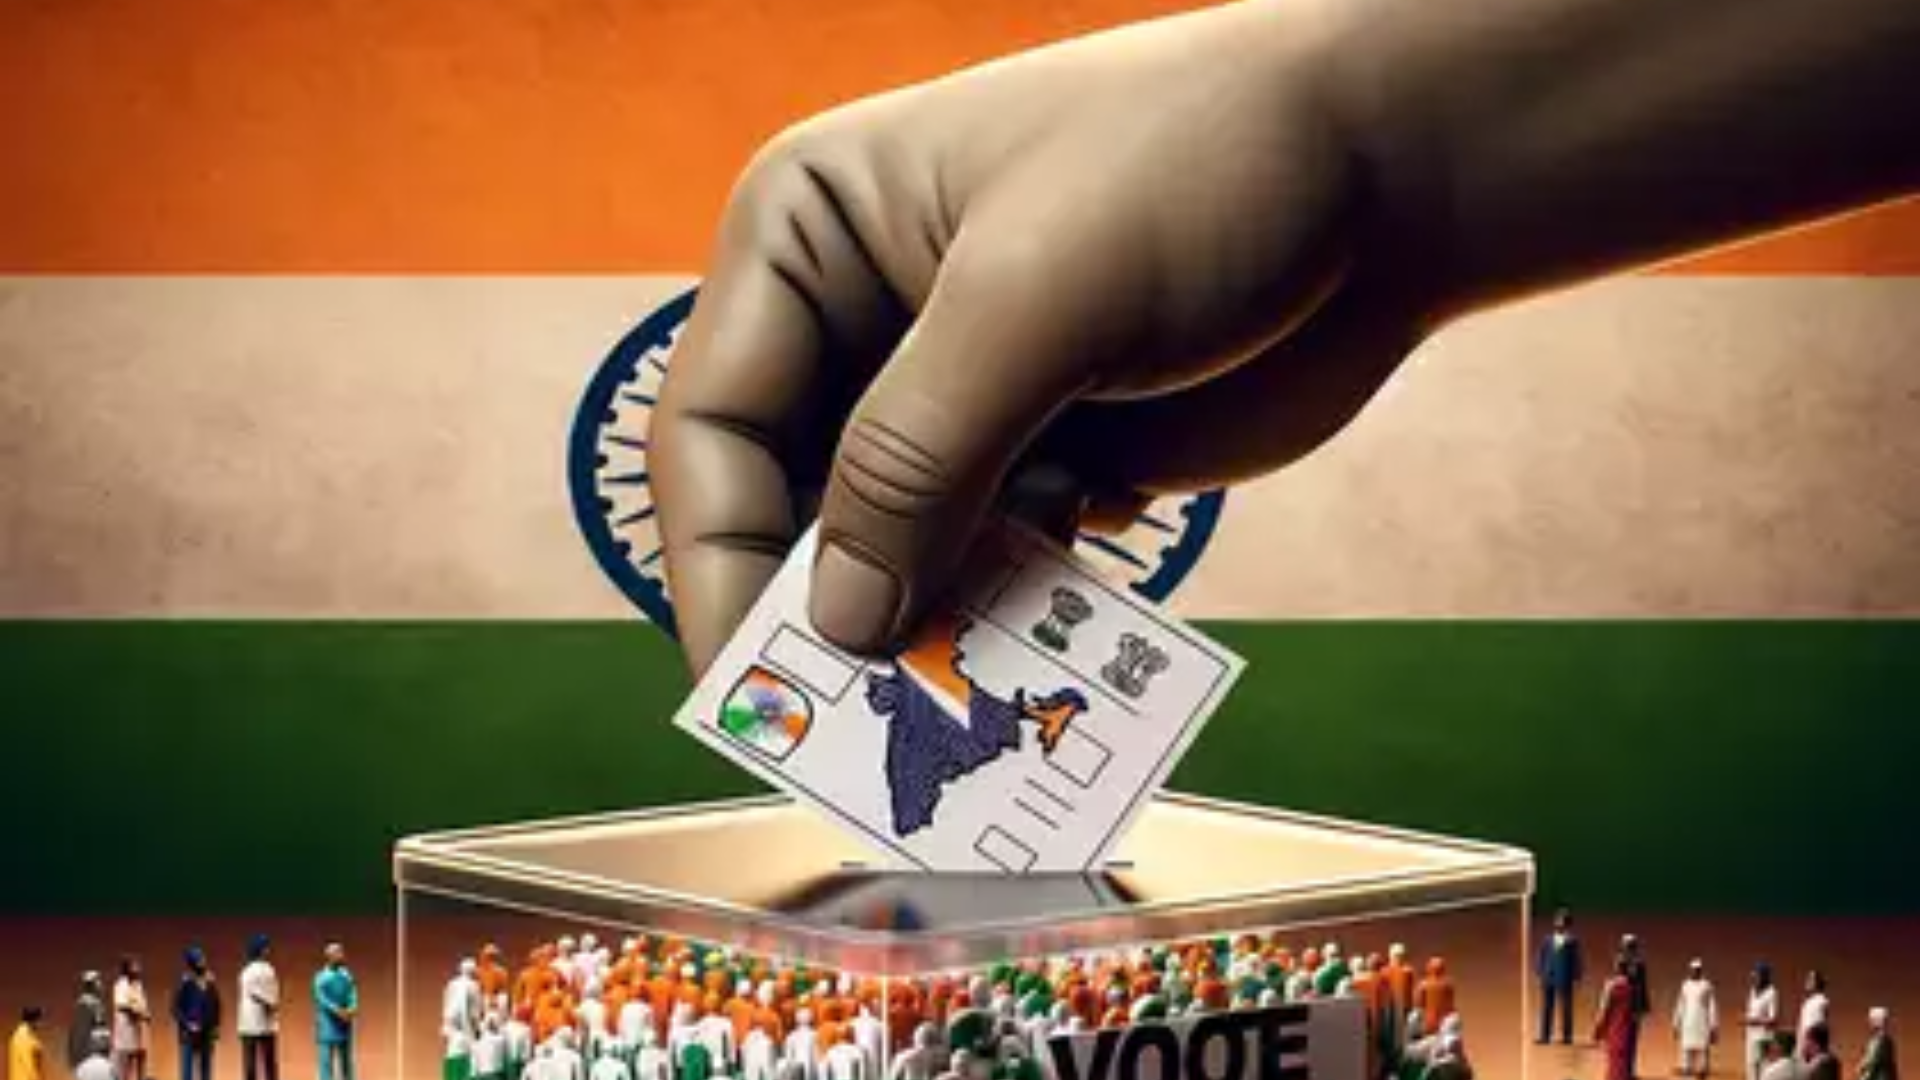 Lok Sabha Election: Second Phase To Commence Across 13 States with 89 Constituencies on April 26